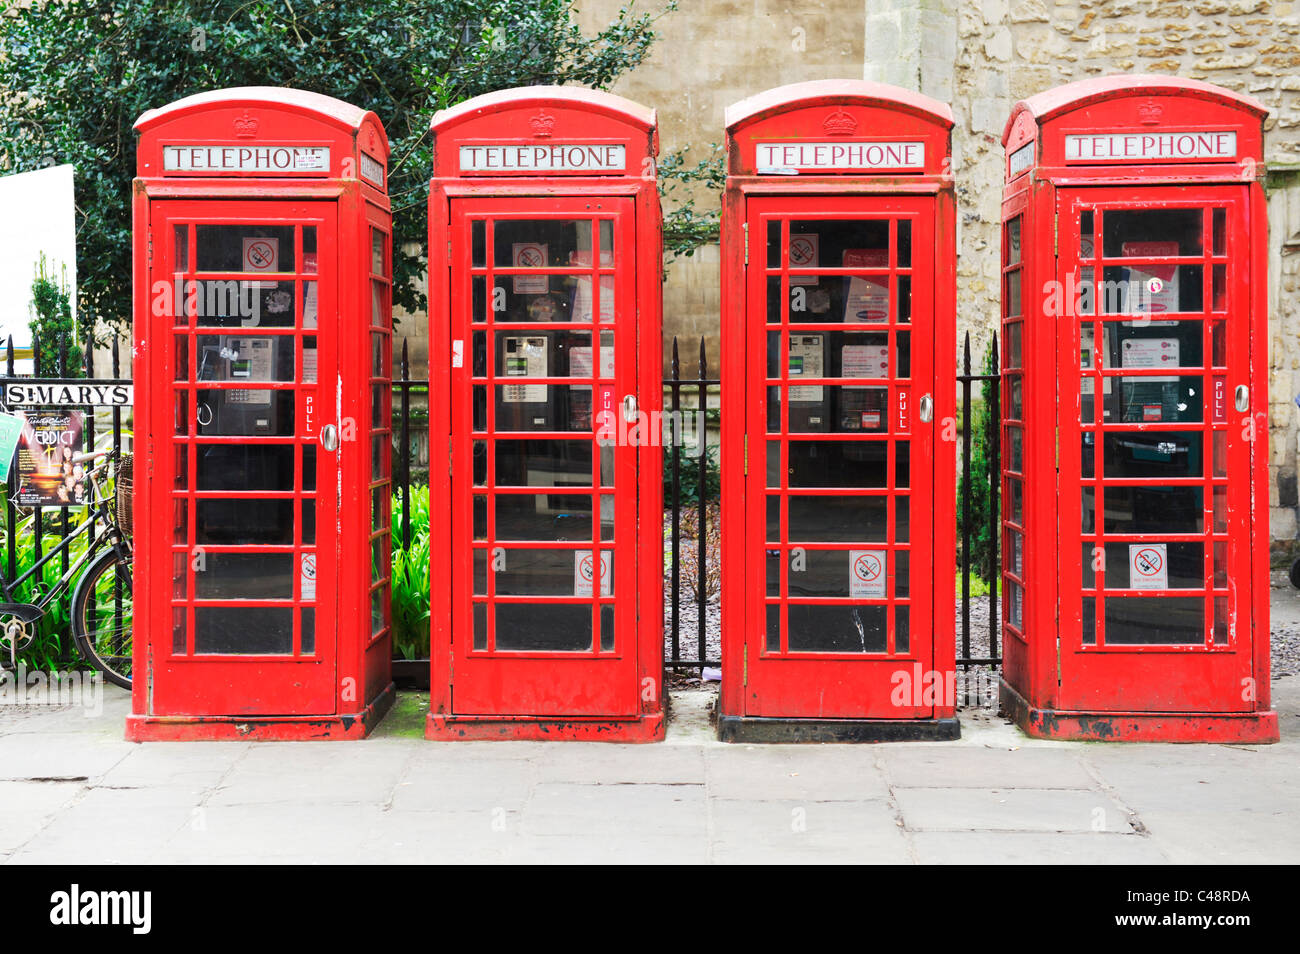 Four red British telecom telephone boxes in a street in the university town of Cambridge in England Stock Photo